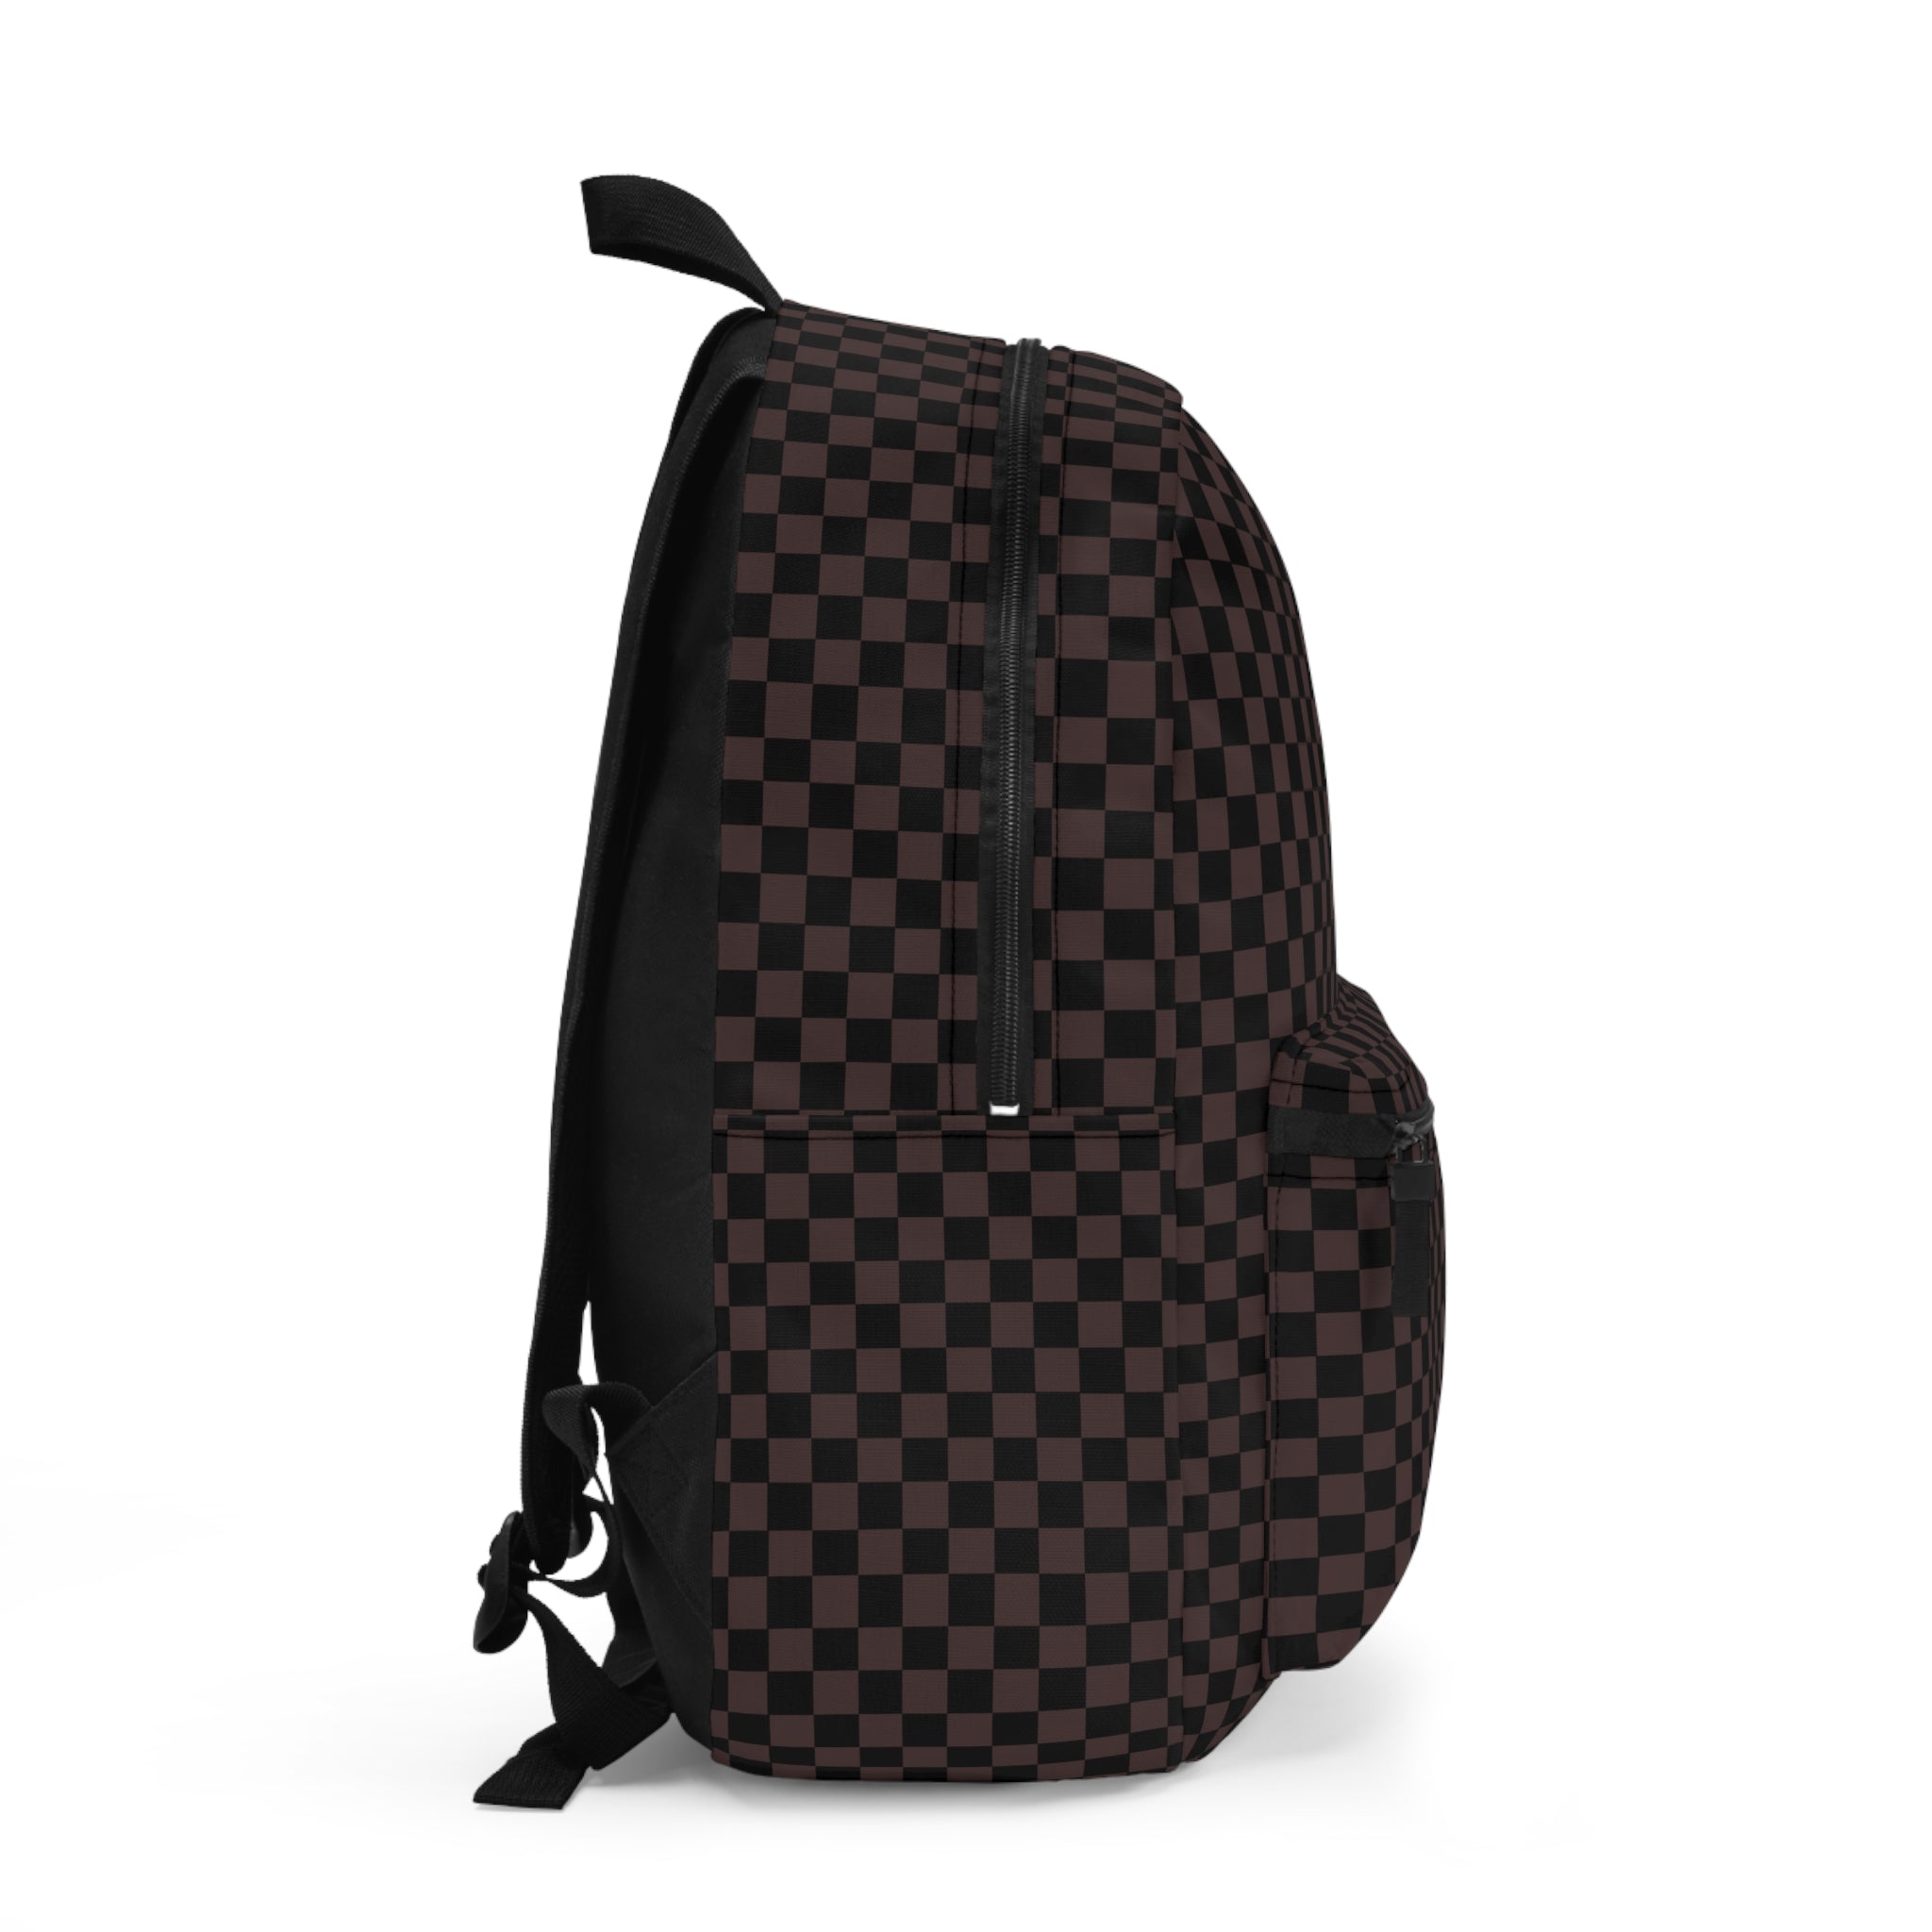  Groove Collection Check Mate (Brown) Backpack, Unisex Plaid Backpack Bags